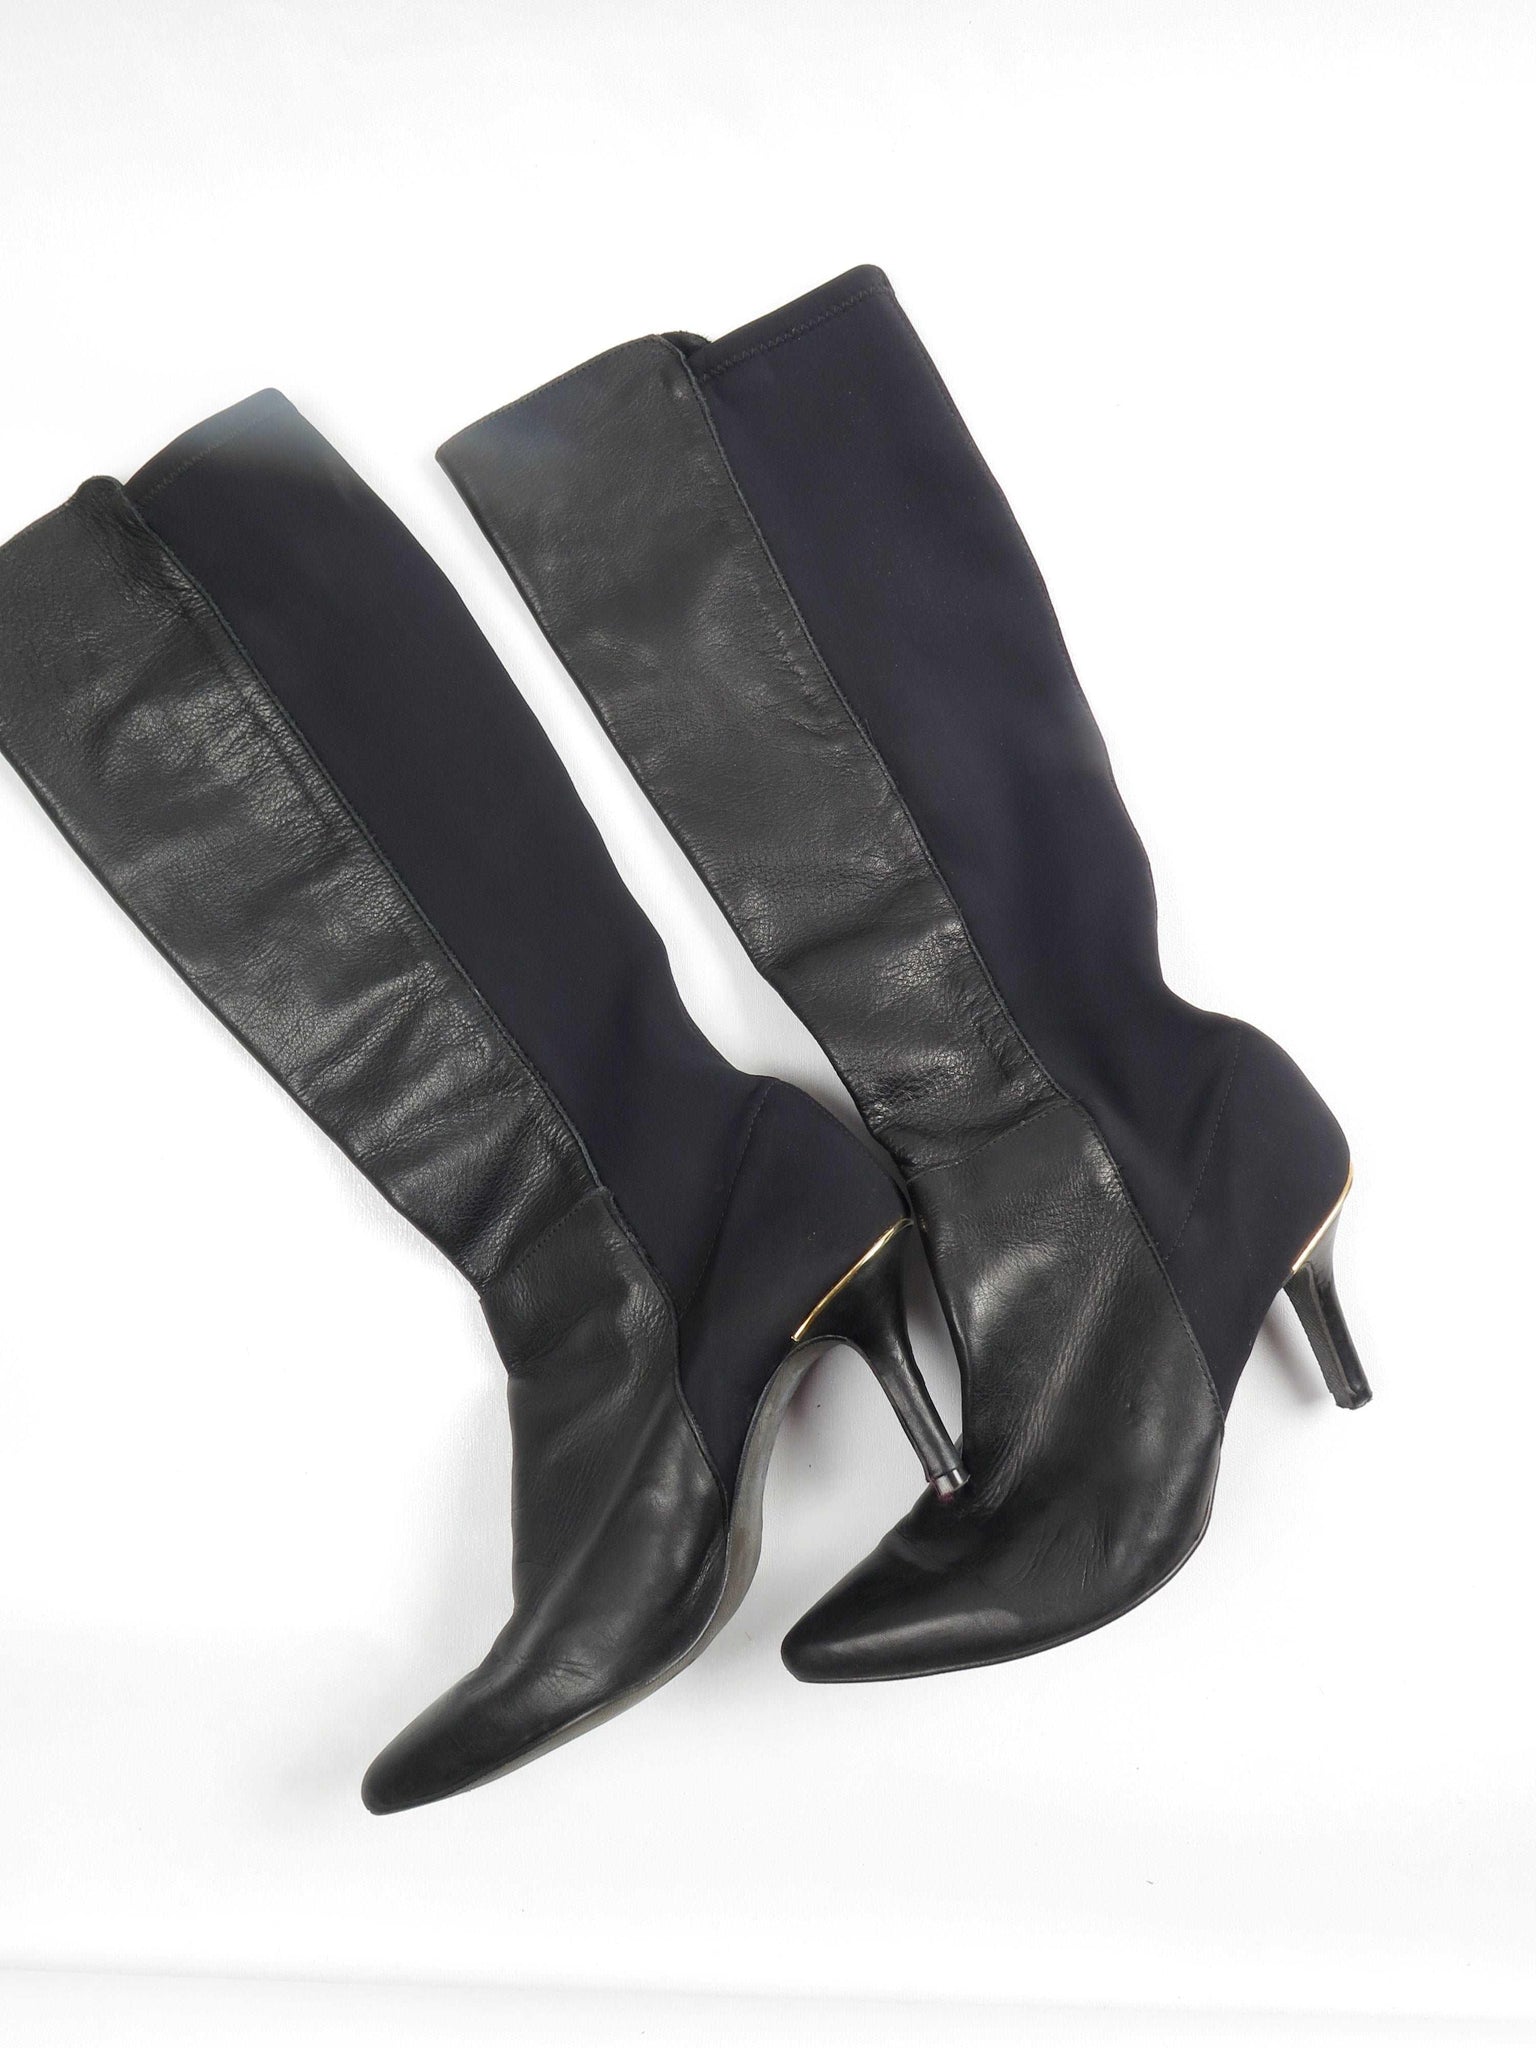 Women's Black Leather Knee-High Boots 40/7 - The Harlequin